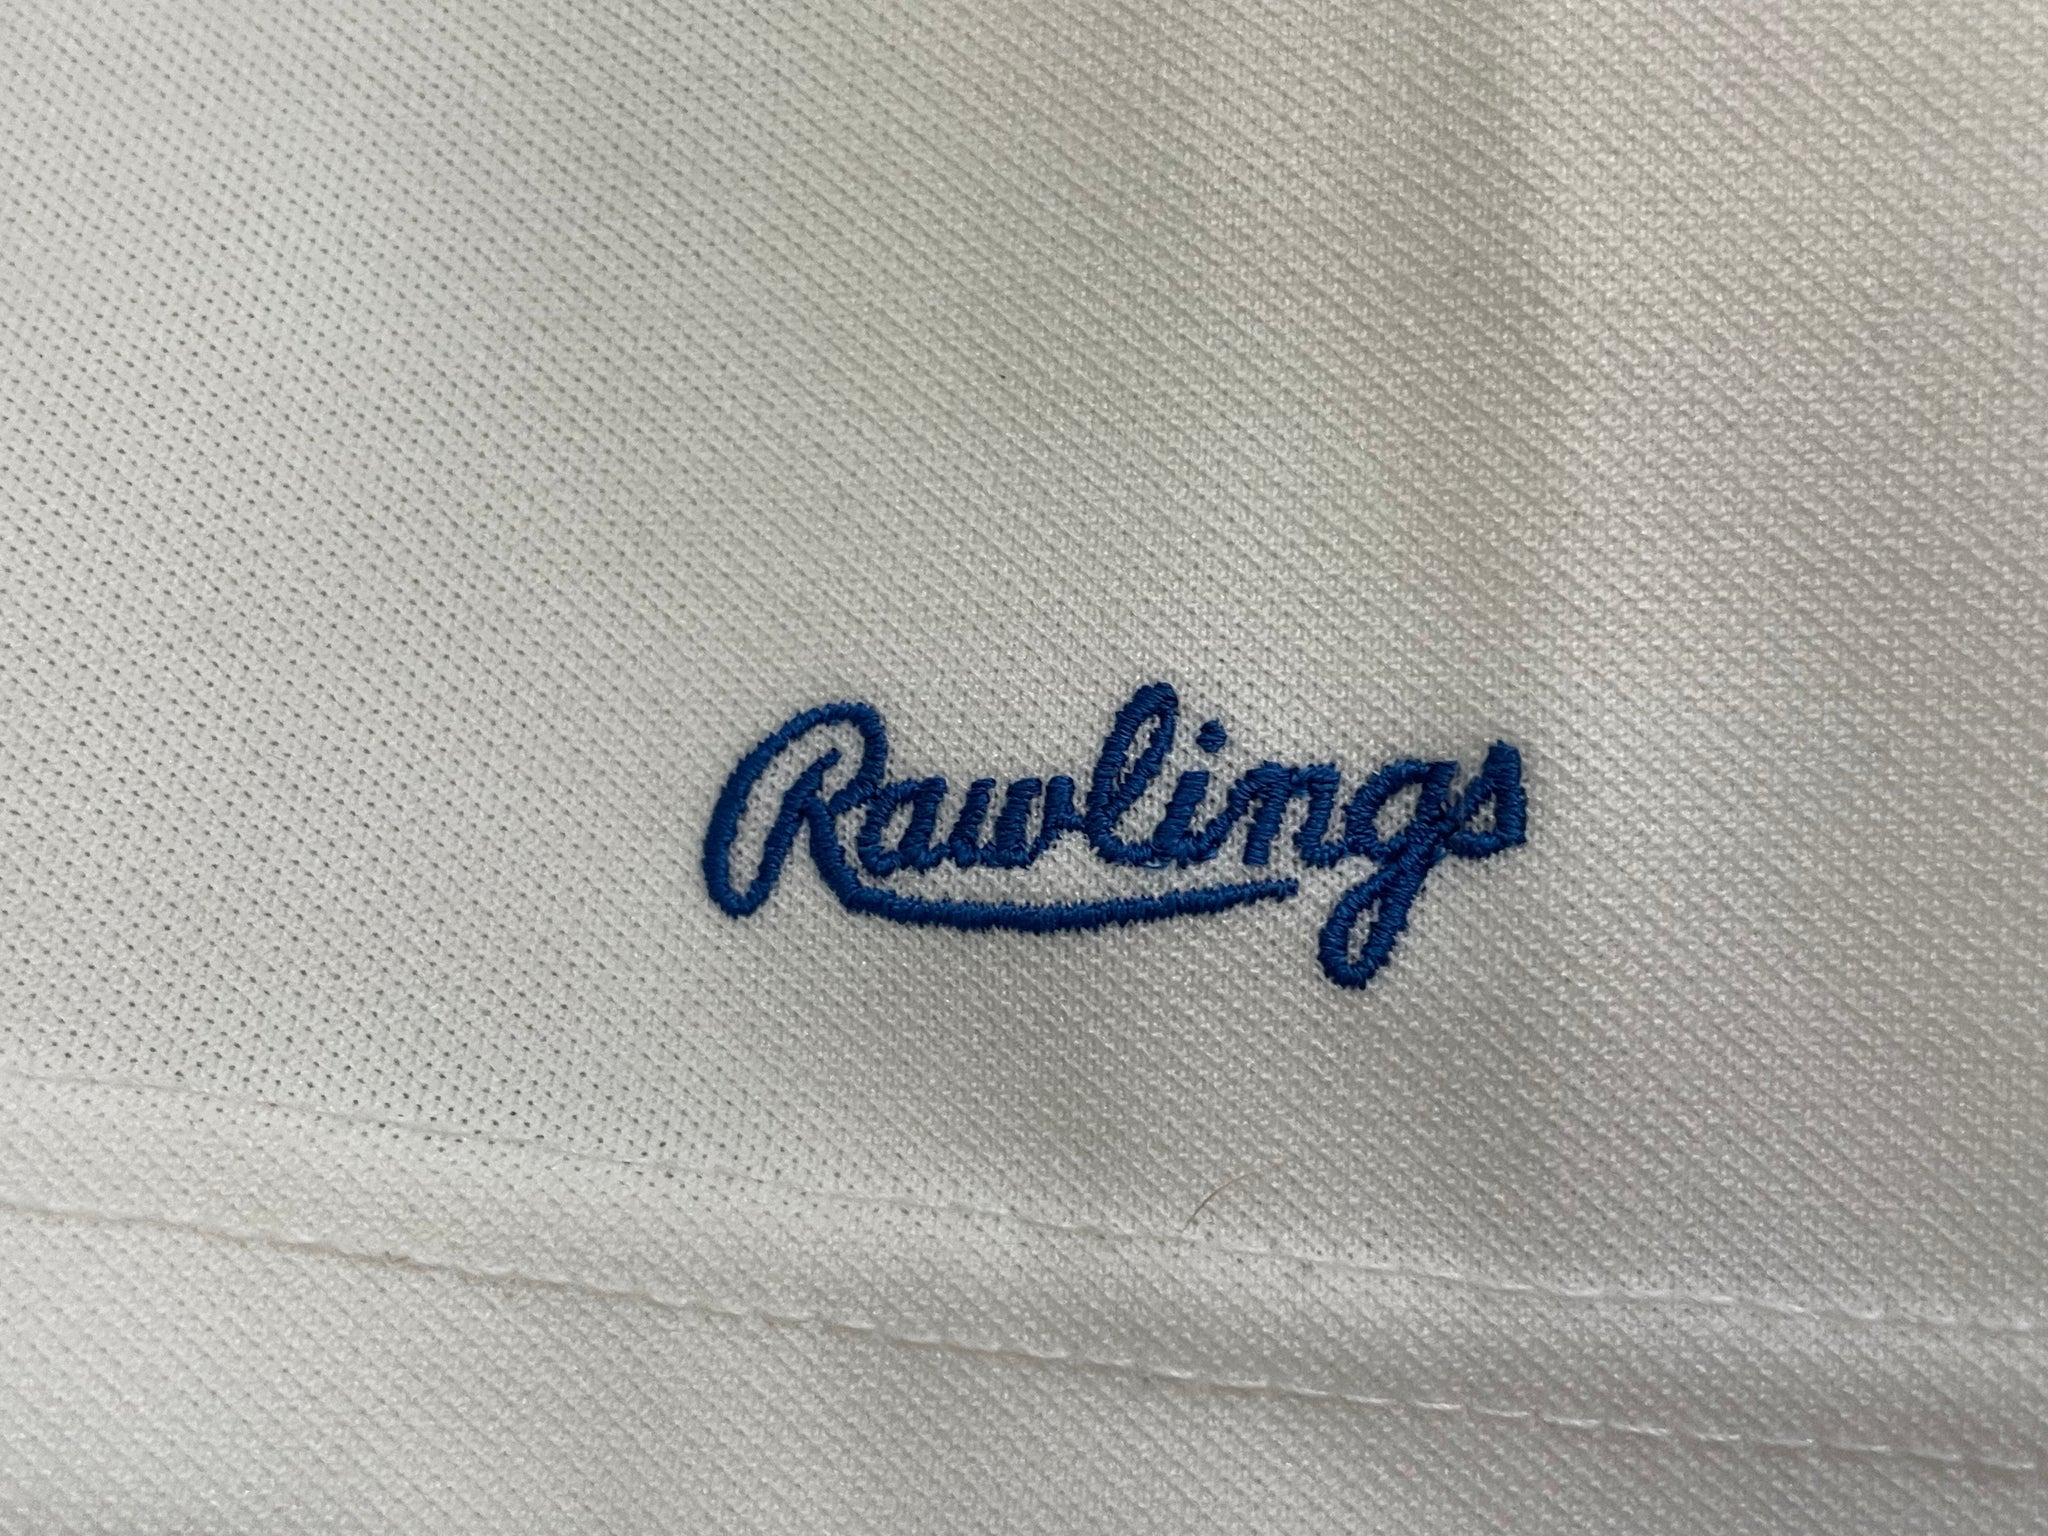 VINTAGE AUTHENTIC LOS ANGELES DODGERS JERSEY 52 XXL RAWLINGS RARE ALTERNATE  MLB